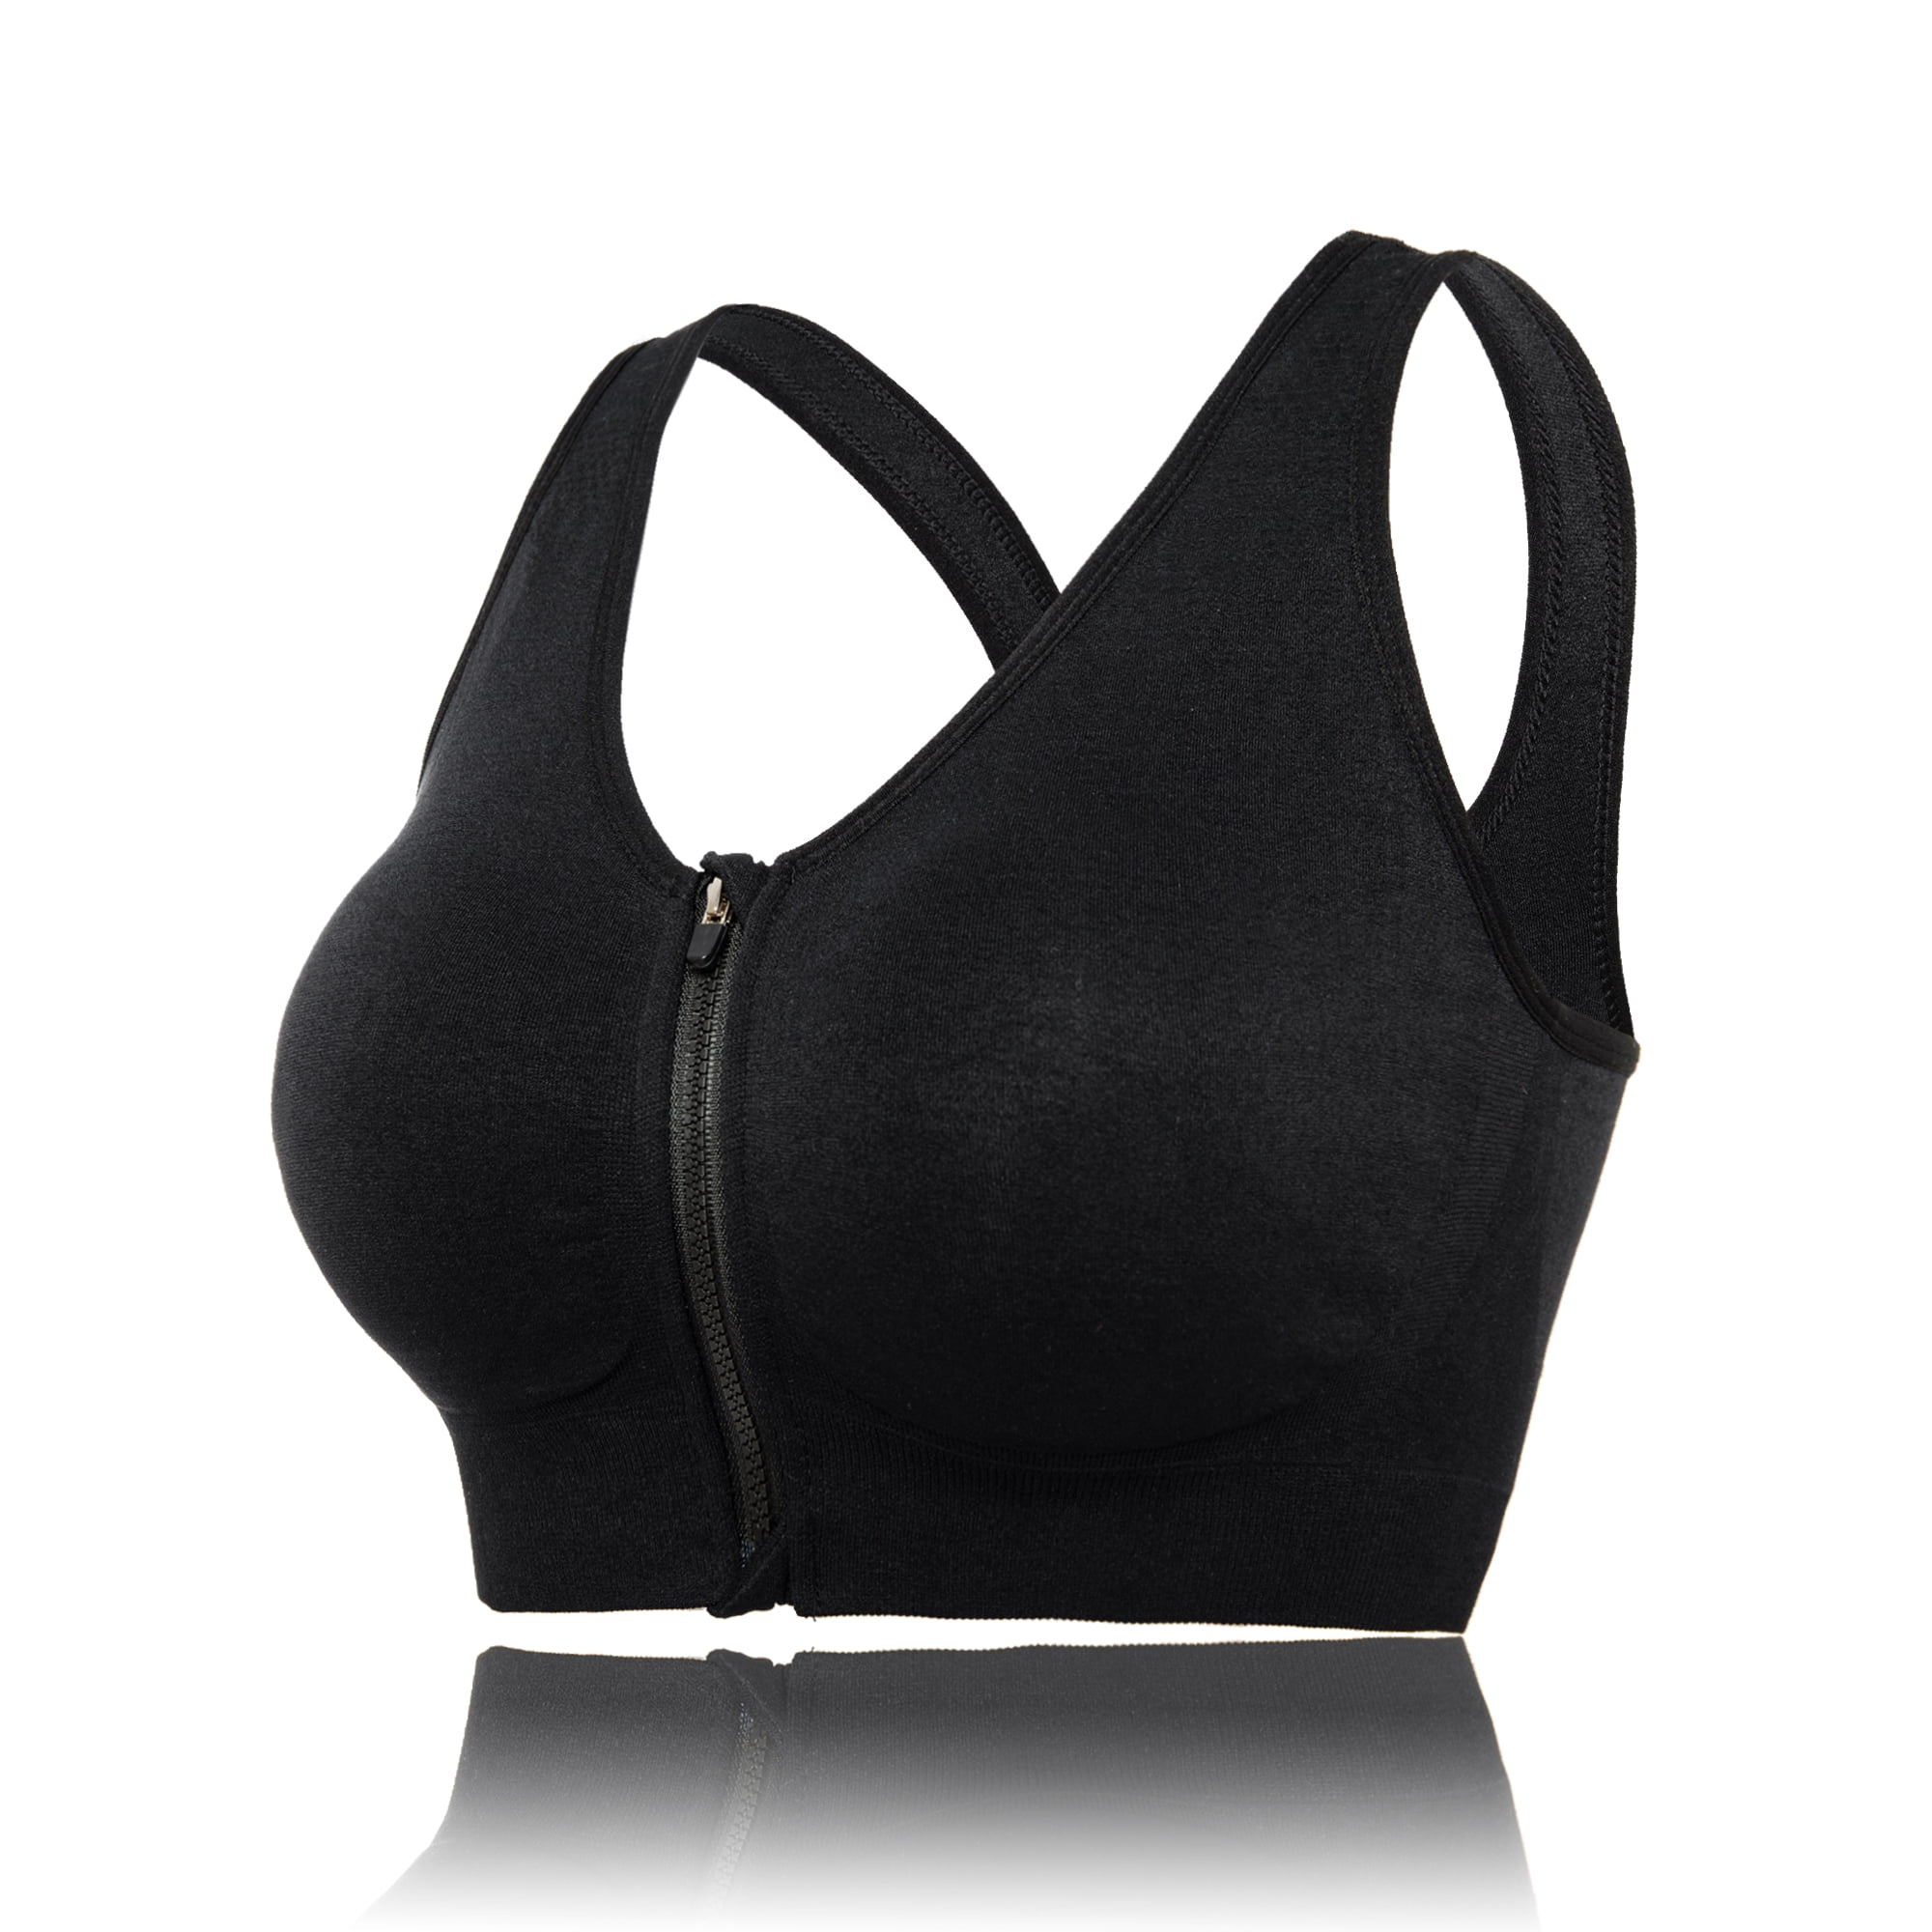 Black and white sports bra with padding for fitness